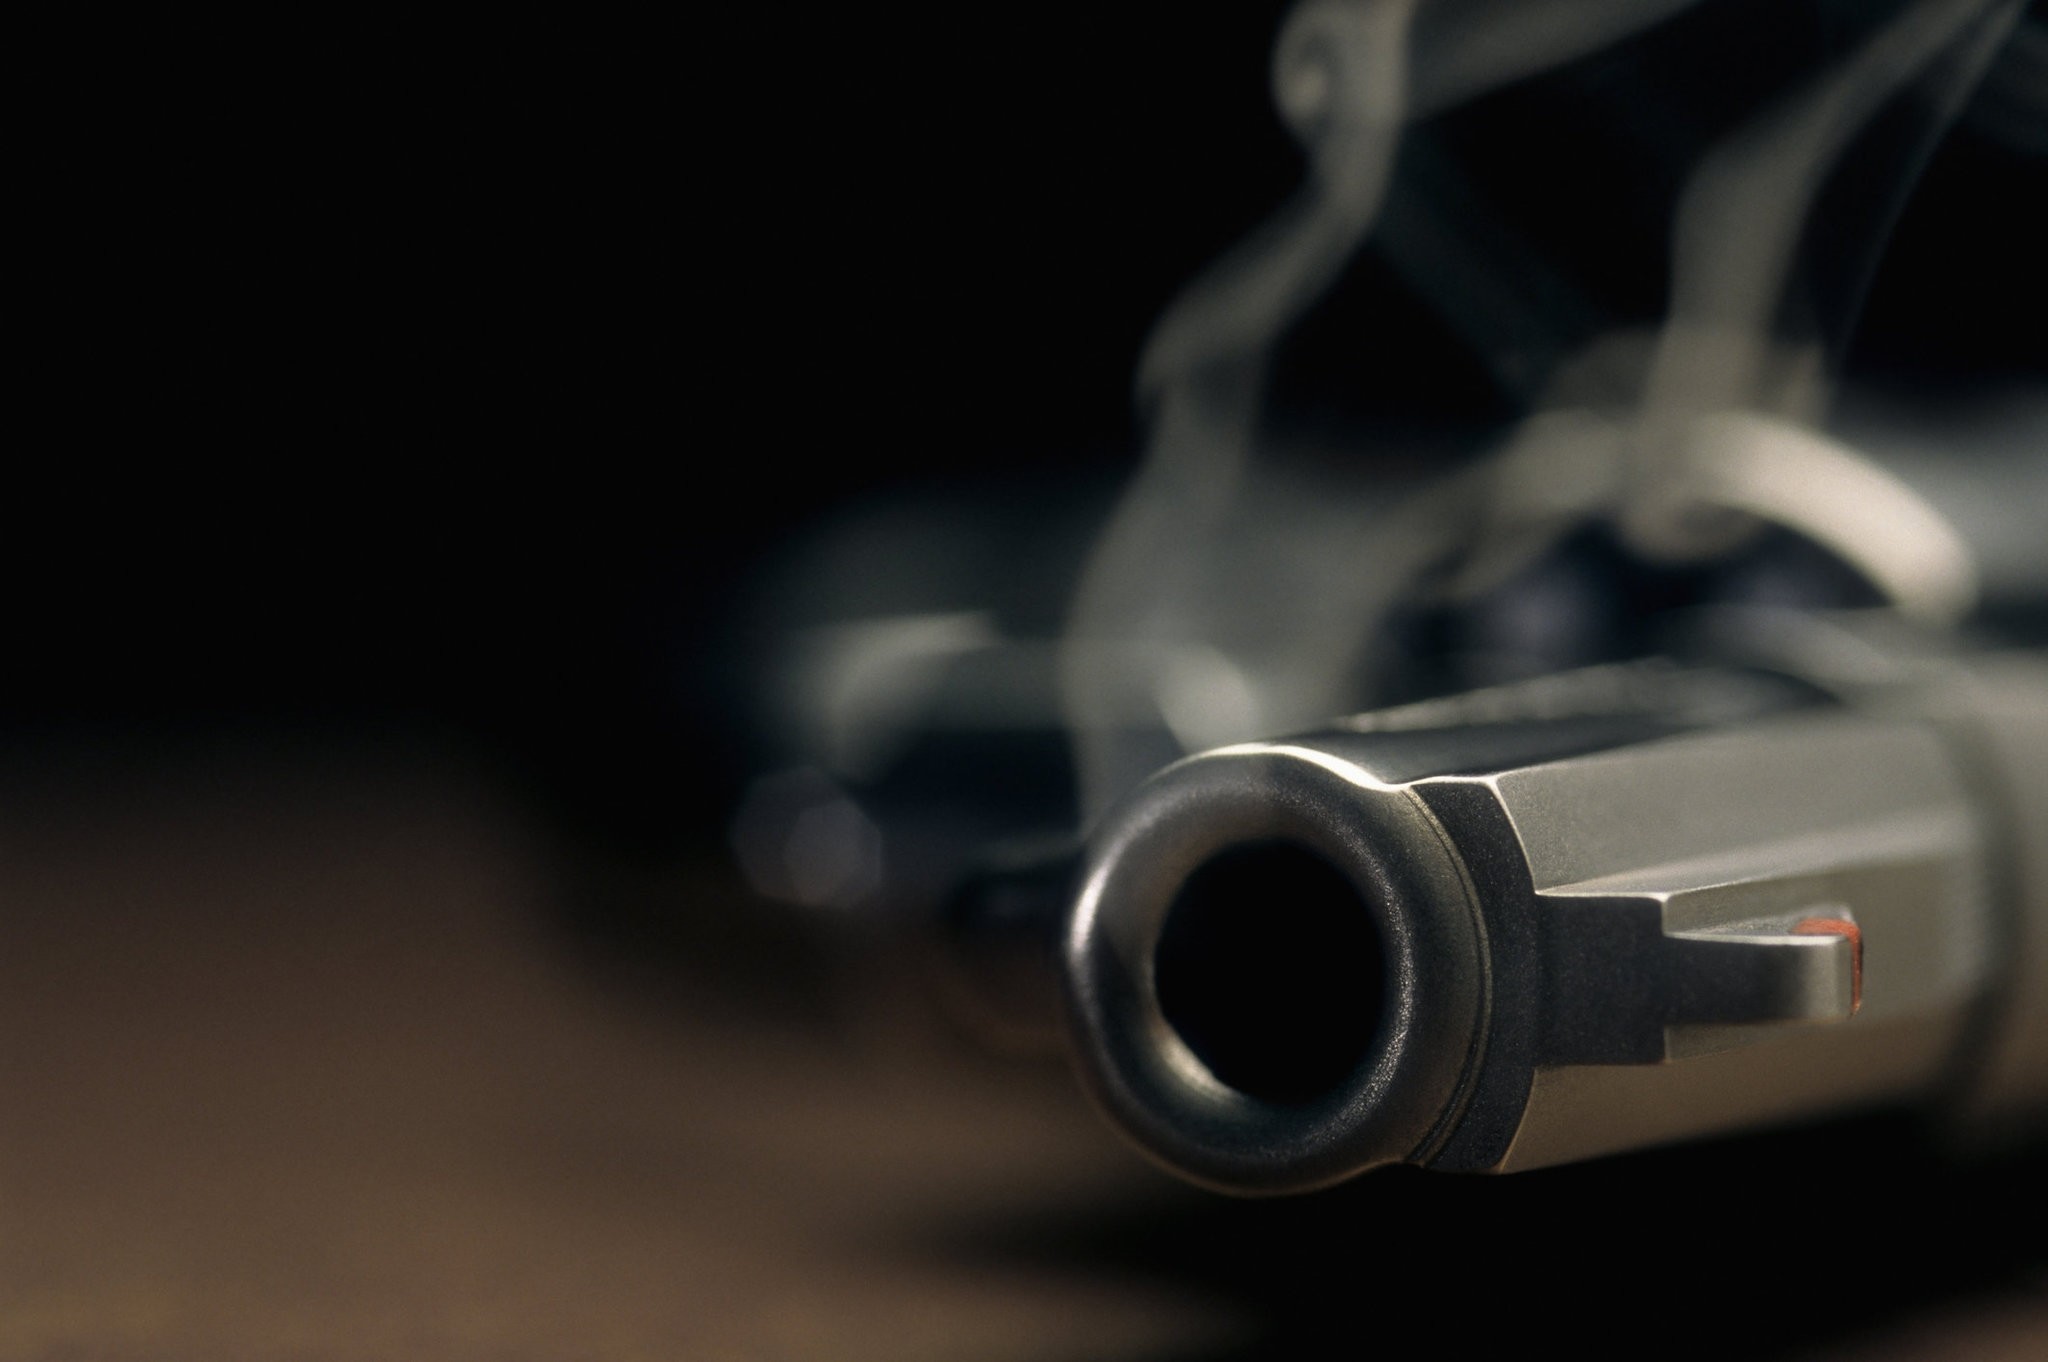  A gritty crime scene image of a smoking hand gun, revolver, lying on the floor with narrow focus on the tip of the barrel and dark background. (FILE Photo)